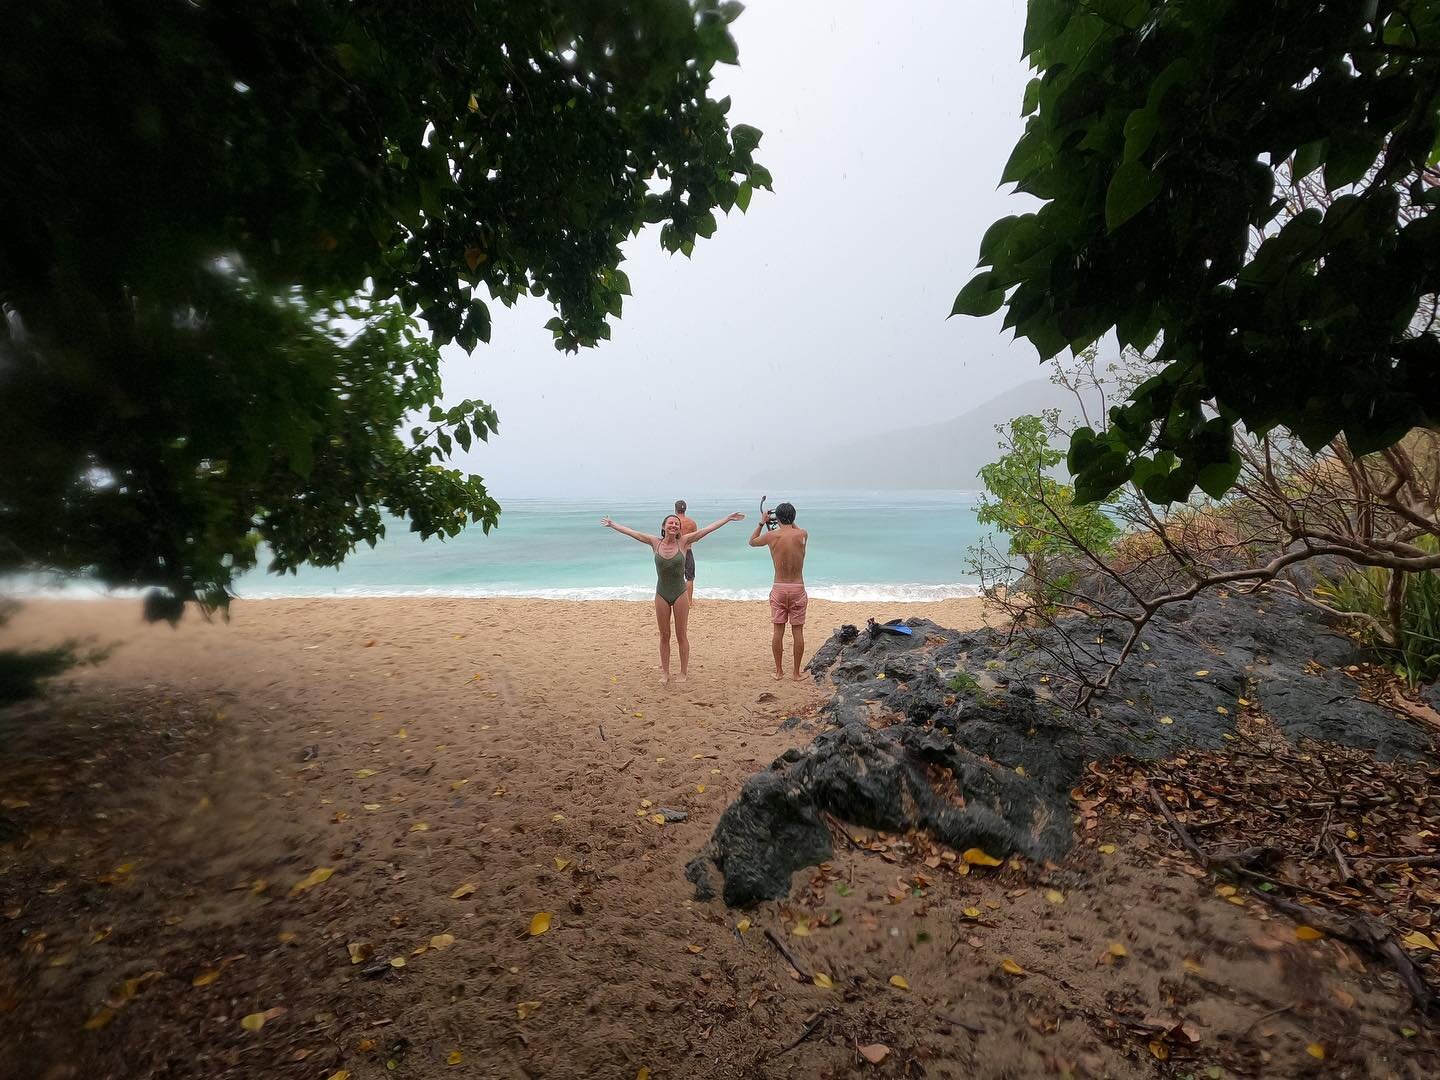 That feeling you get when you explore the reef bay ruins, taste your first tamarind, win a hermit crab race, snorkel with a turtle and get nailed by a wild Caribbean squall! All before 10:30! 

#charter #charterboat #vacation #usvi #vi #bvi #stjohn #